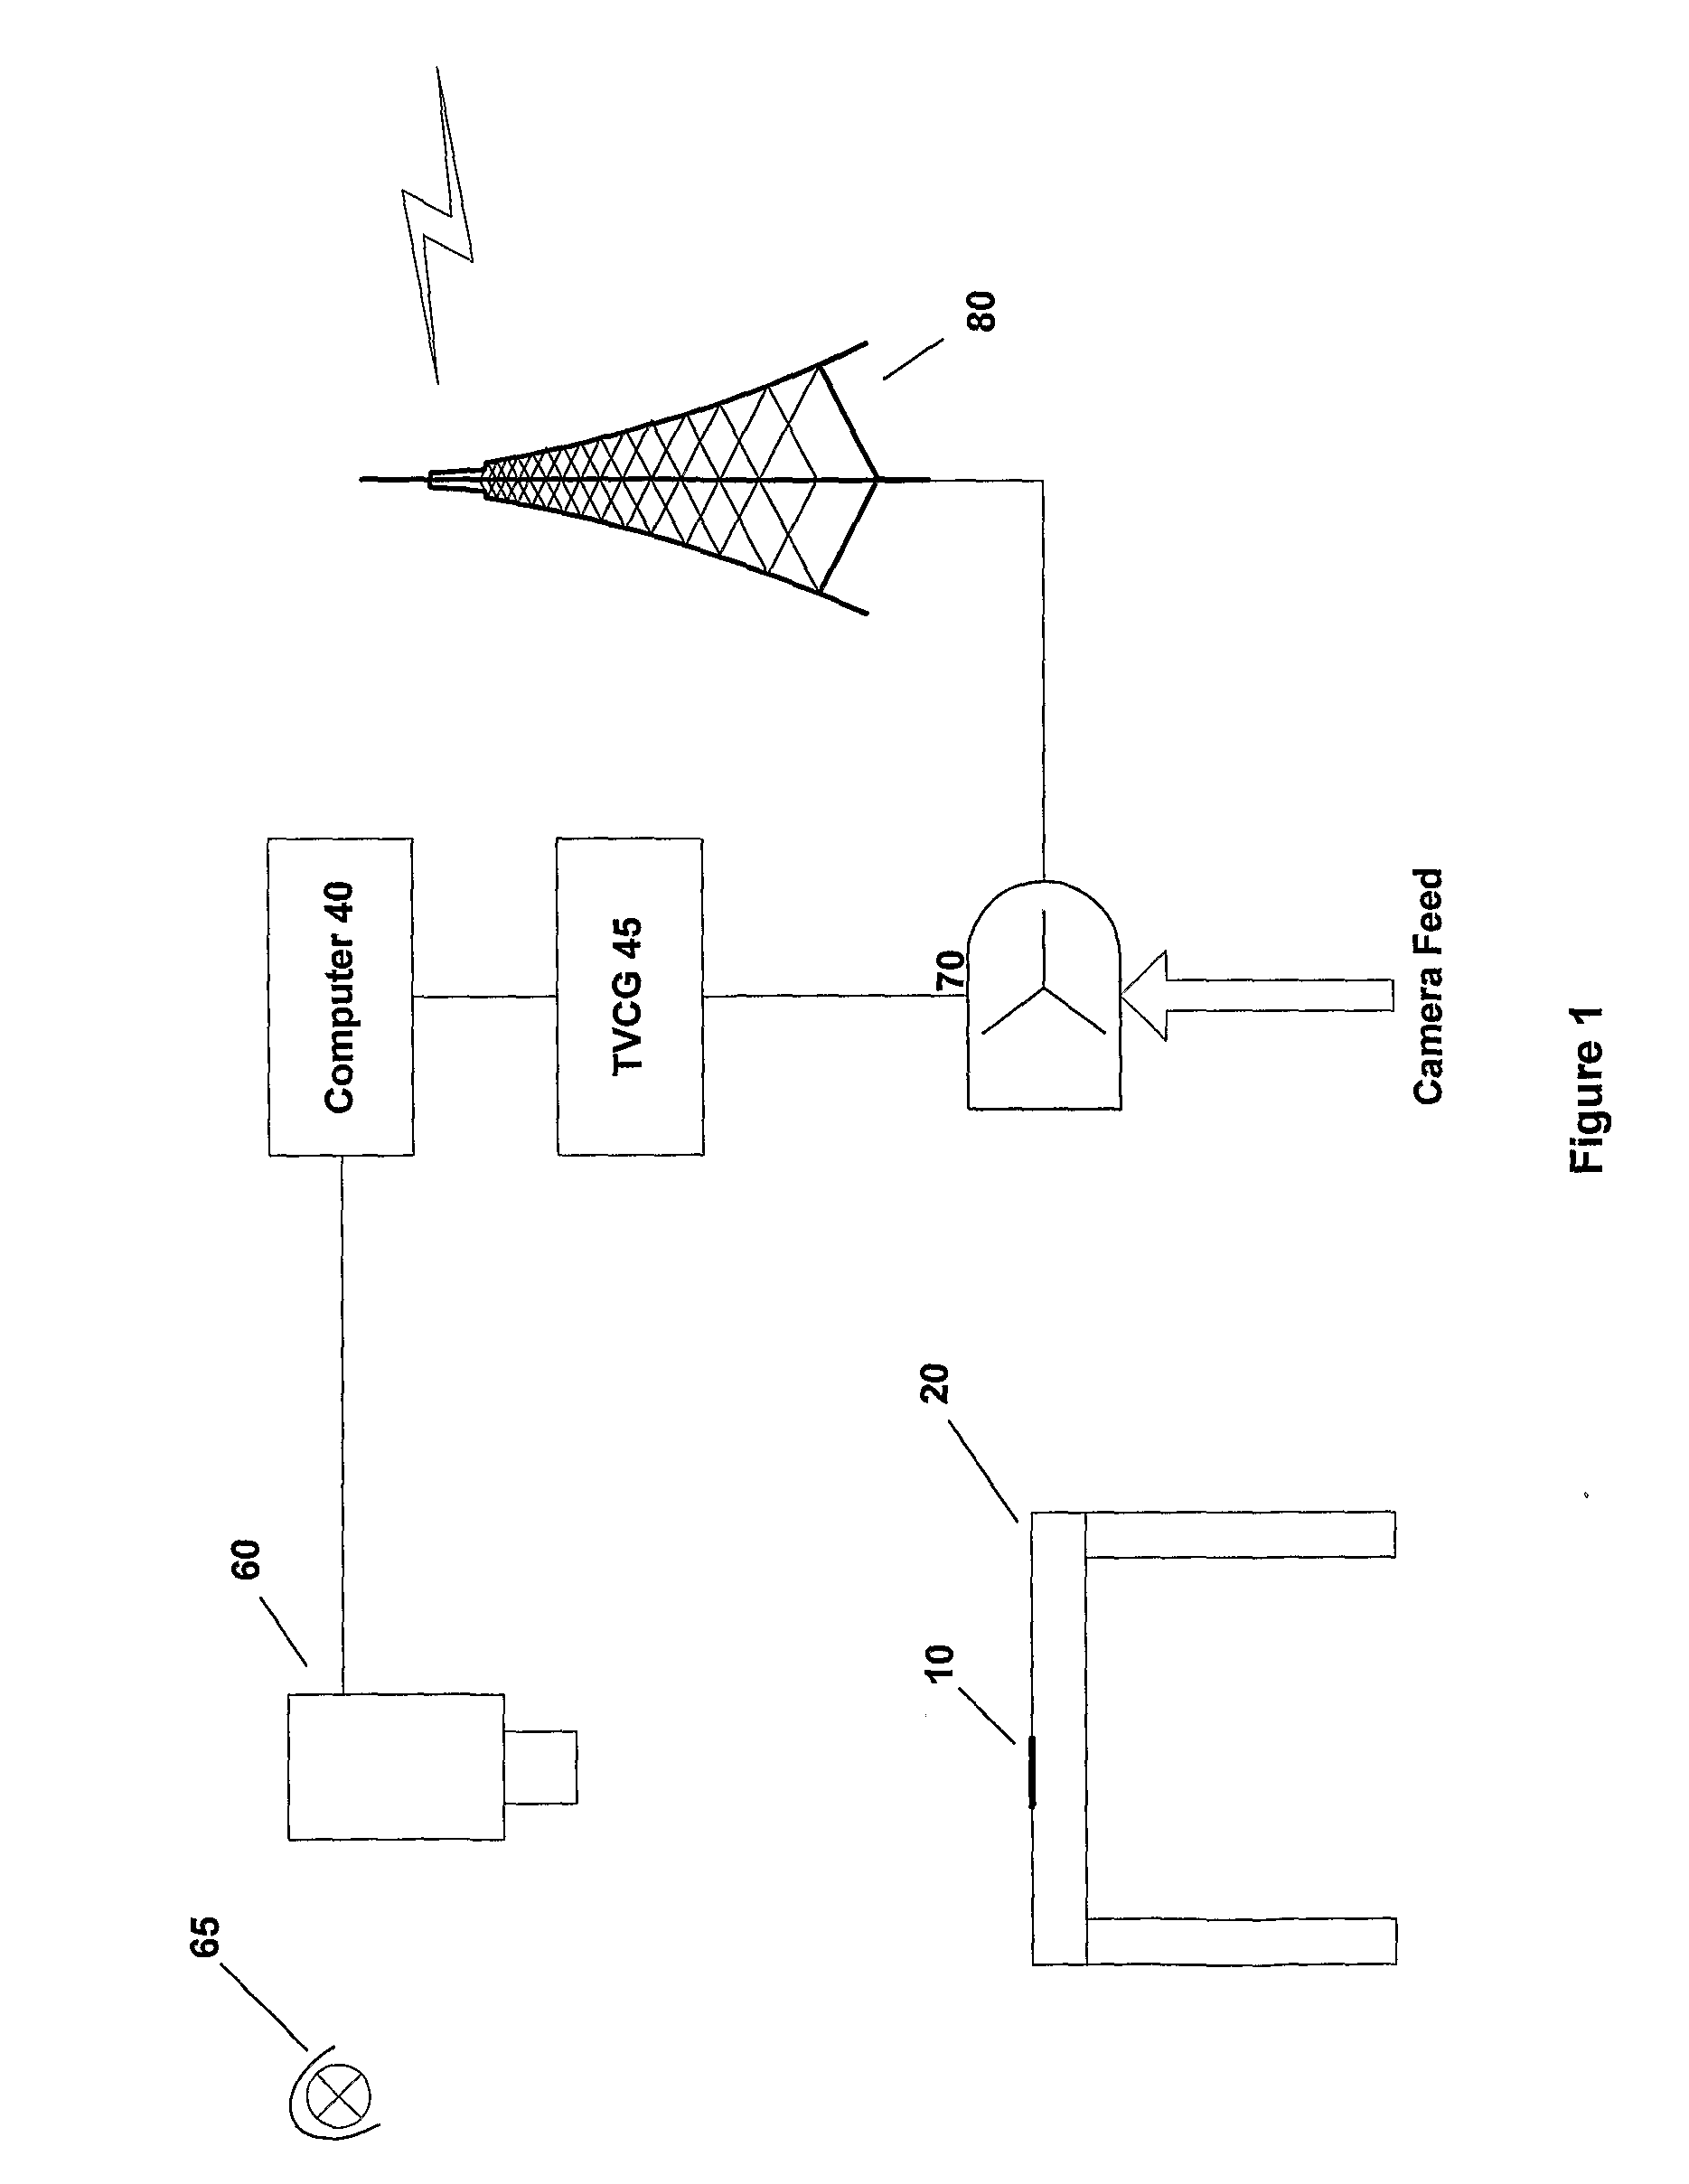 Method and apparatus for televising a card game